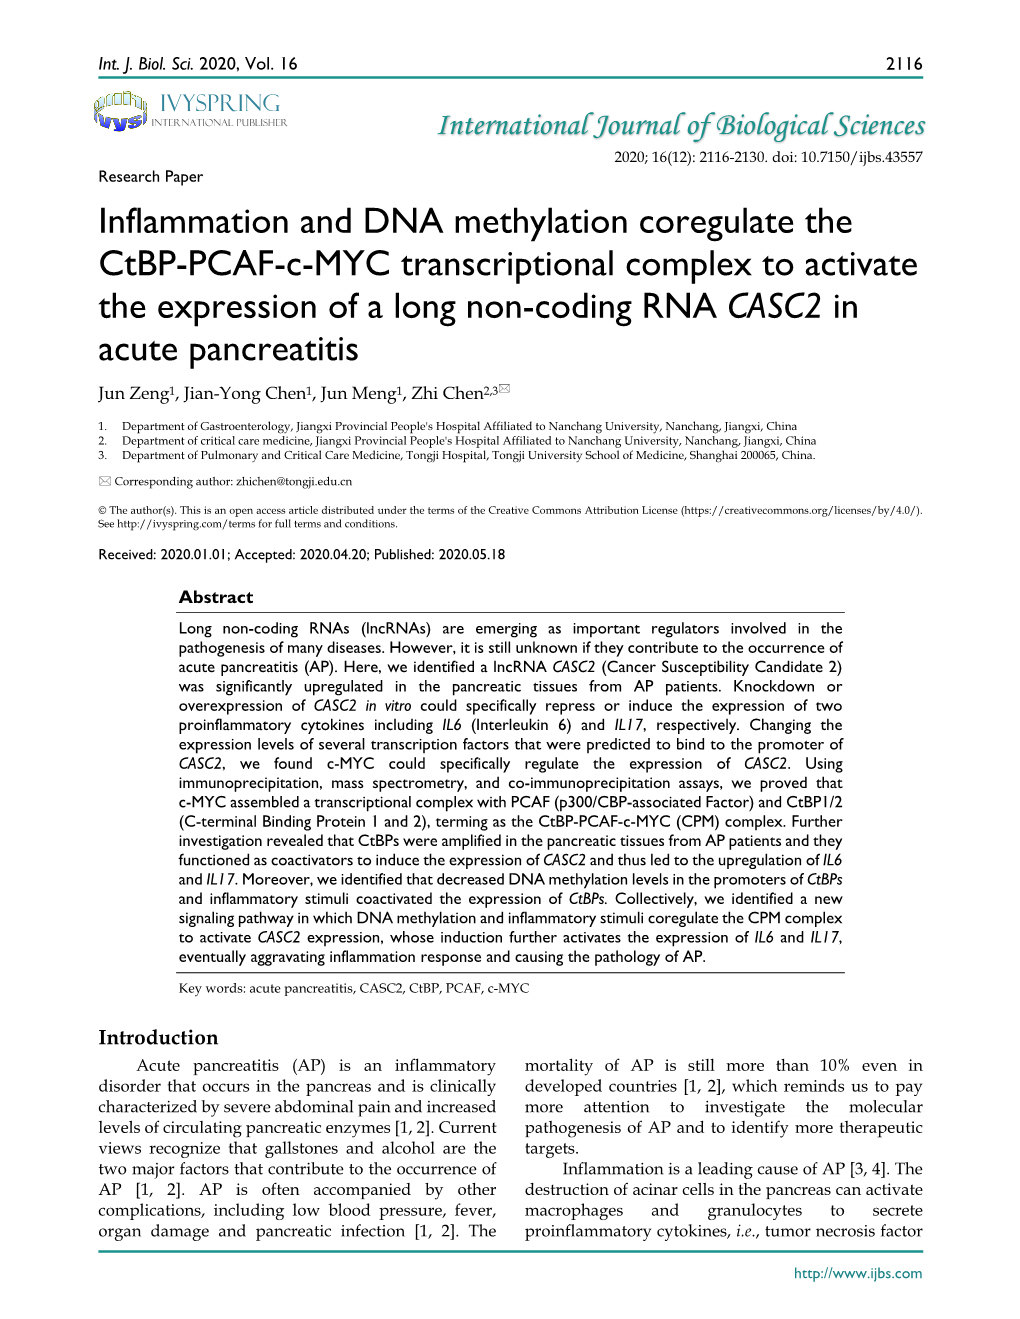 Inflammation and DNA Methylation Coregulate the Ctbp-PCAF-C-MYC